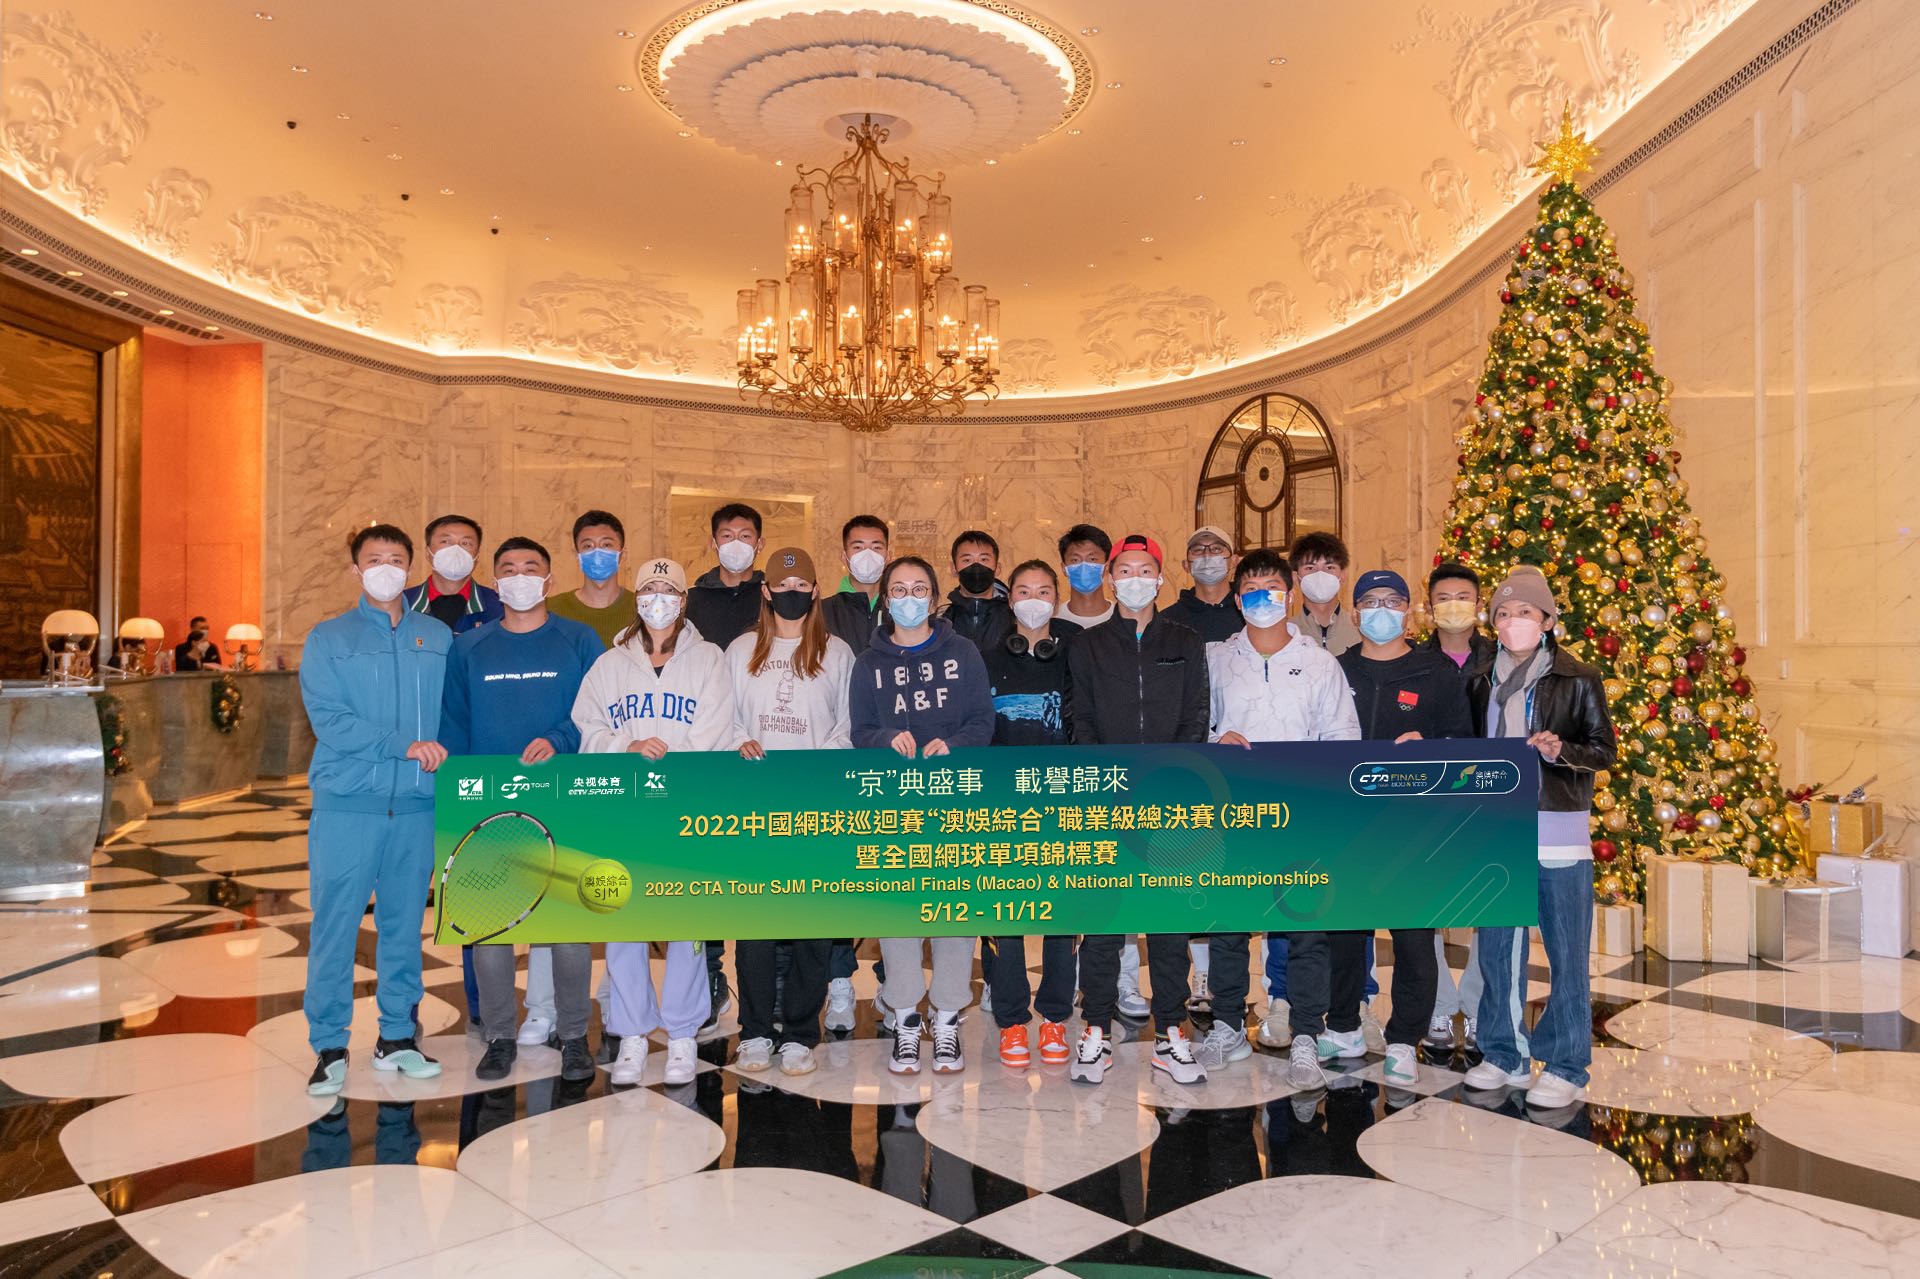 Tennis players arrive in Macao and take a photo at the Grand Lisboa Palace